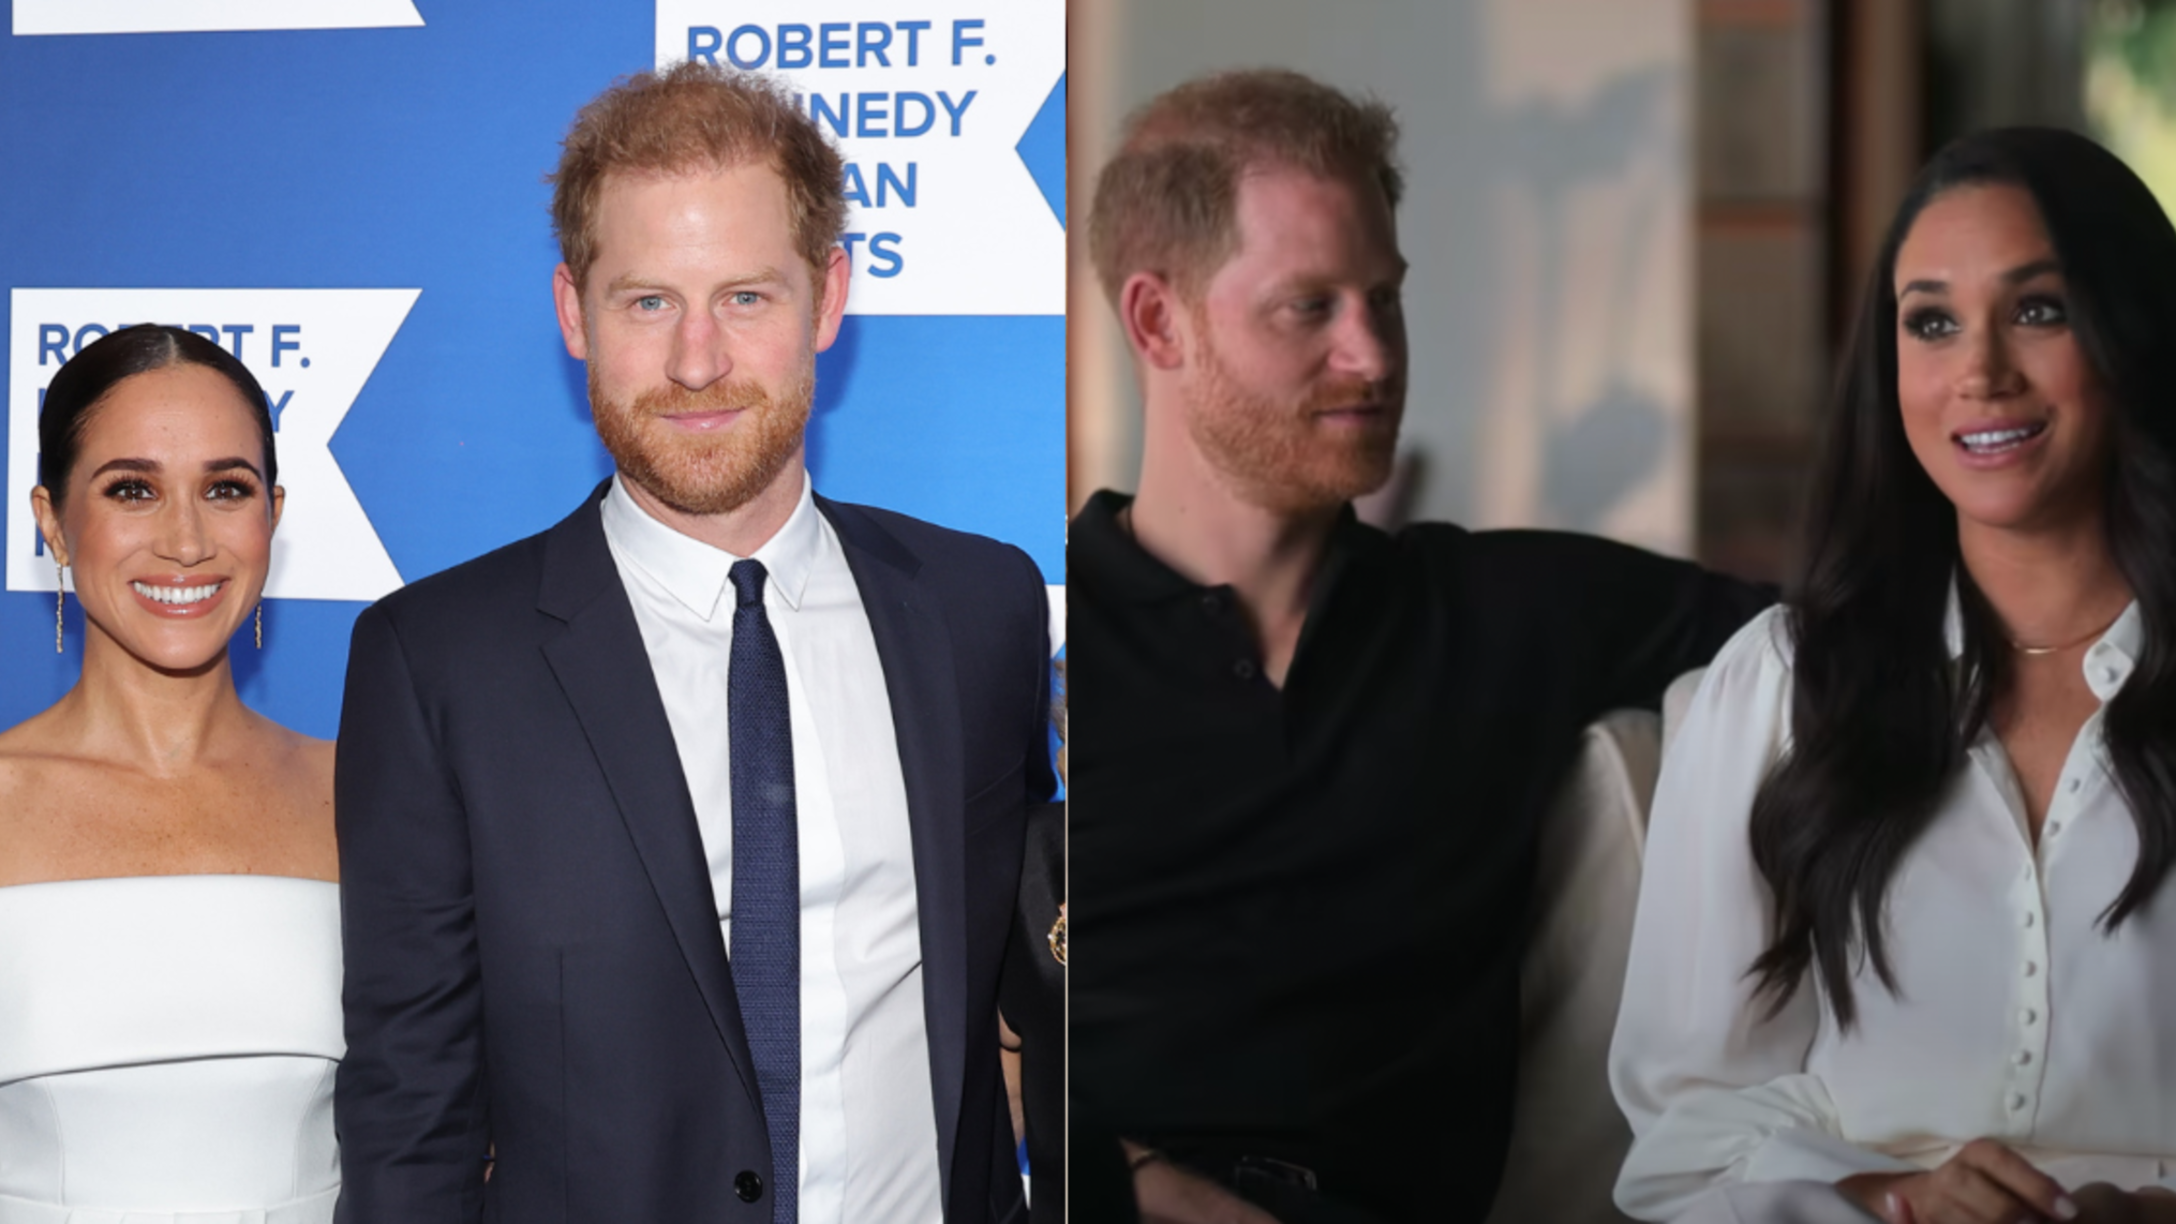 Prince Harry & Meghan Markle Respond to Critics Calling Them Hypocrites After Docuseries